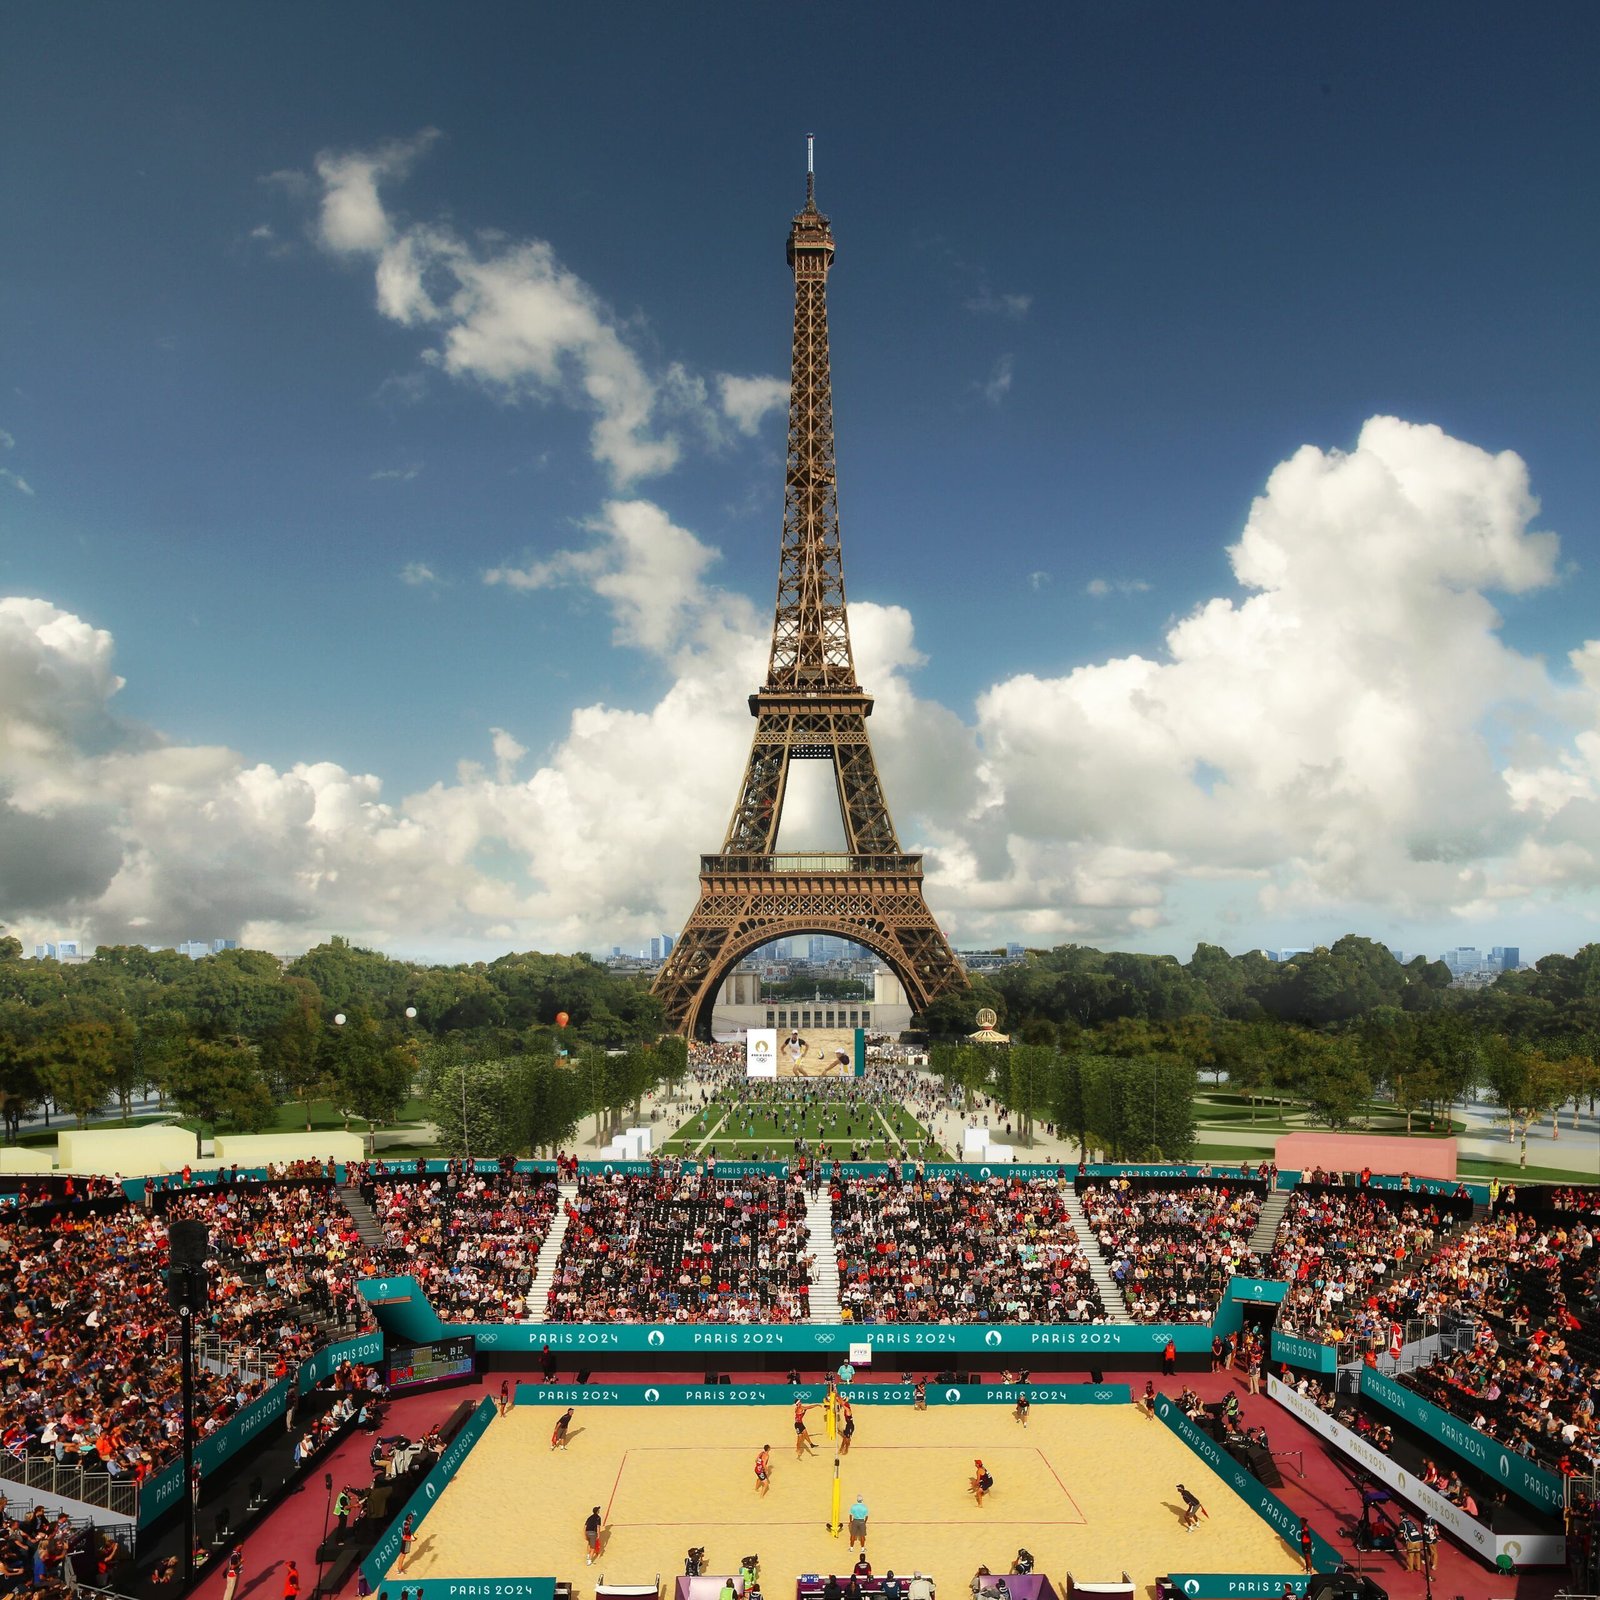 Paris Olympic Games are scheduled to begin from 26 July to 11 August 2024